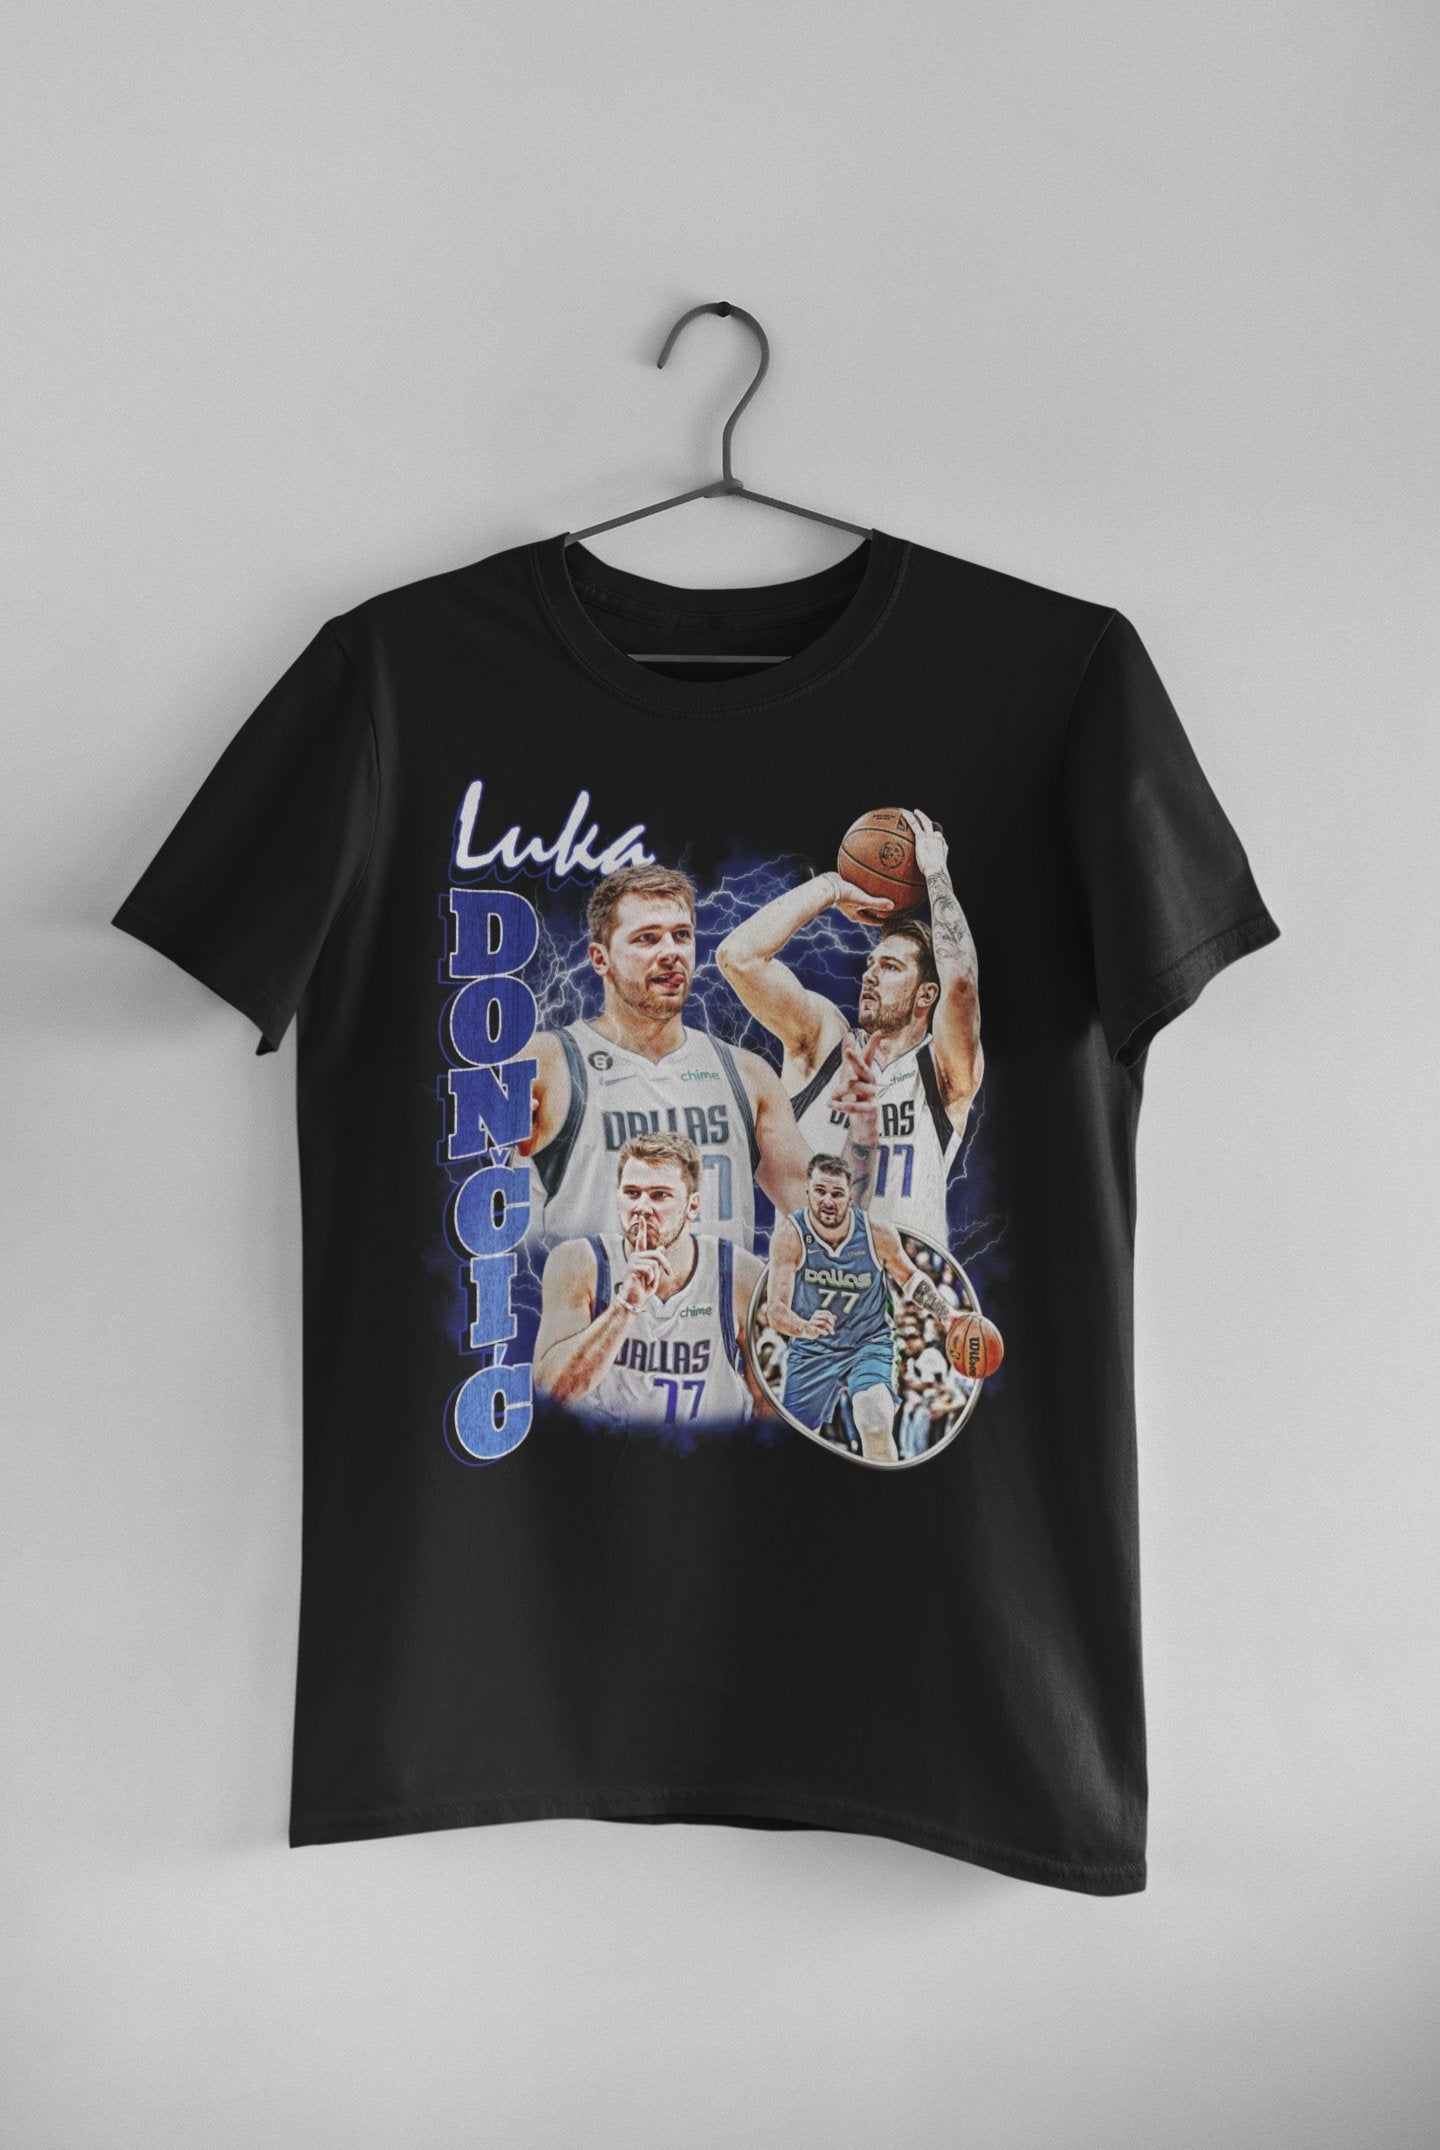 LSVDesignsCo Luka Doncic Shirt Vintage Unisex T-Shirt, 90s Bootleg Style, Dallas Retro T-Shirt, Oversized Graphic Tee, Birthday Gifts for Him and Her